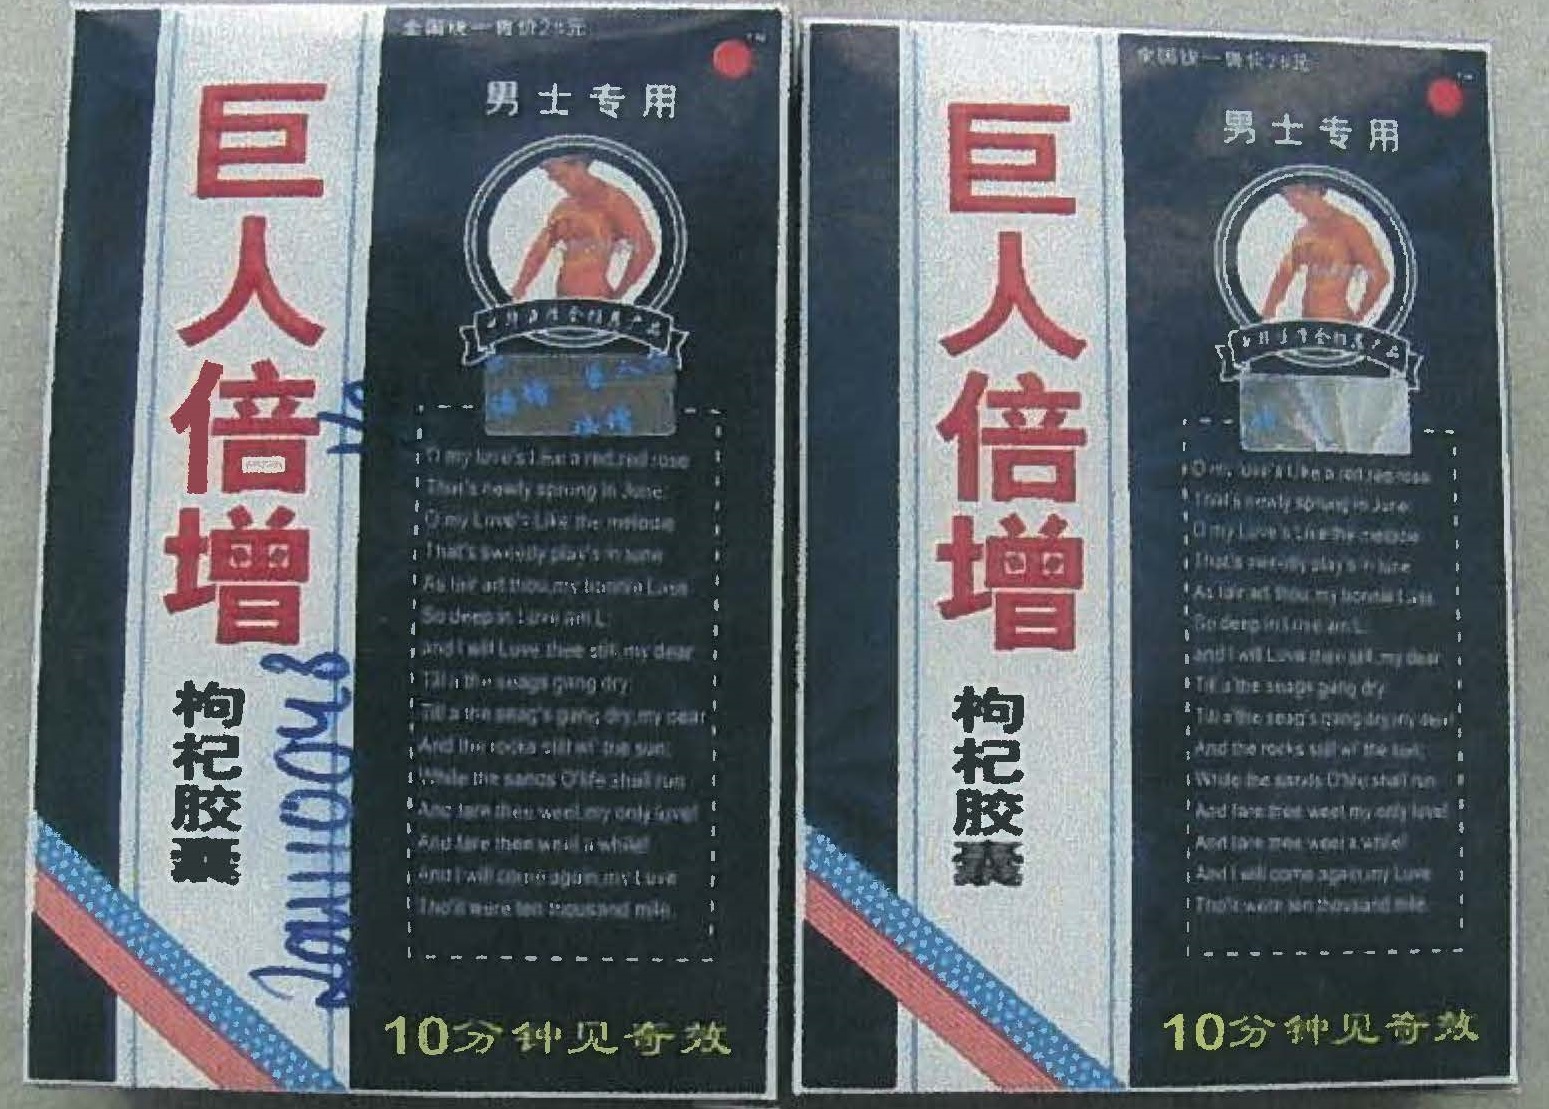 Image of the illigal product: Ju Ren Bei Zeng 